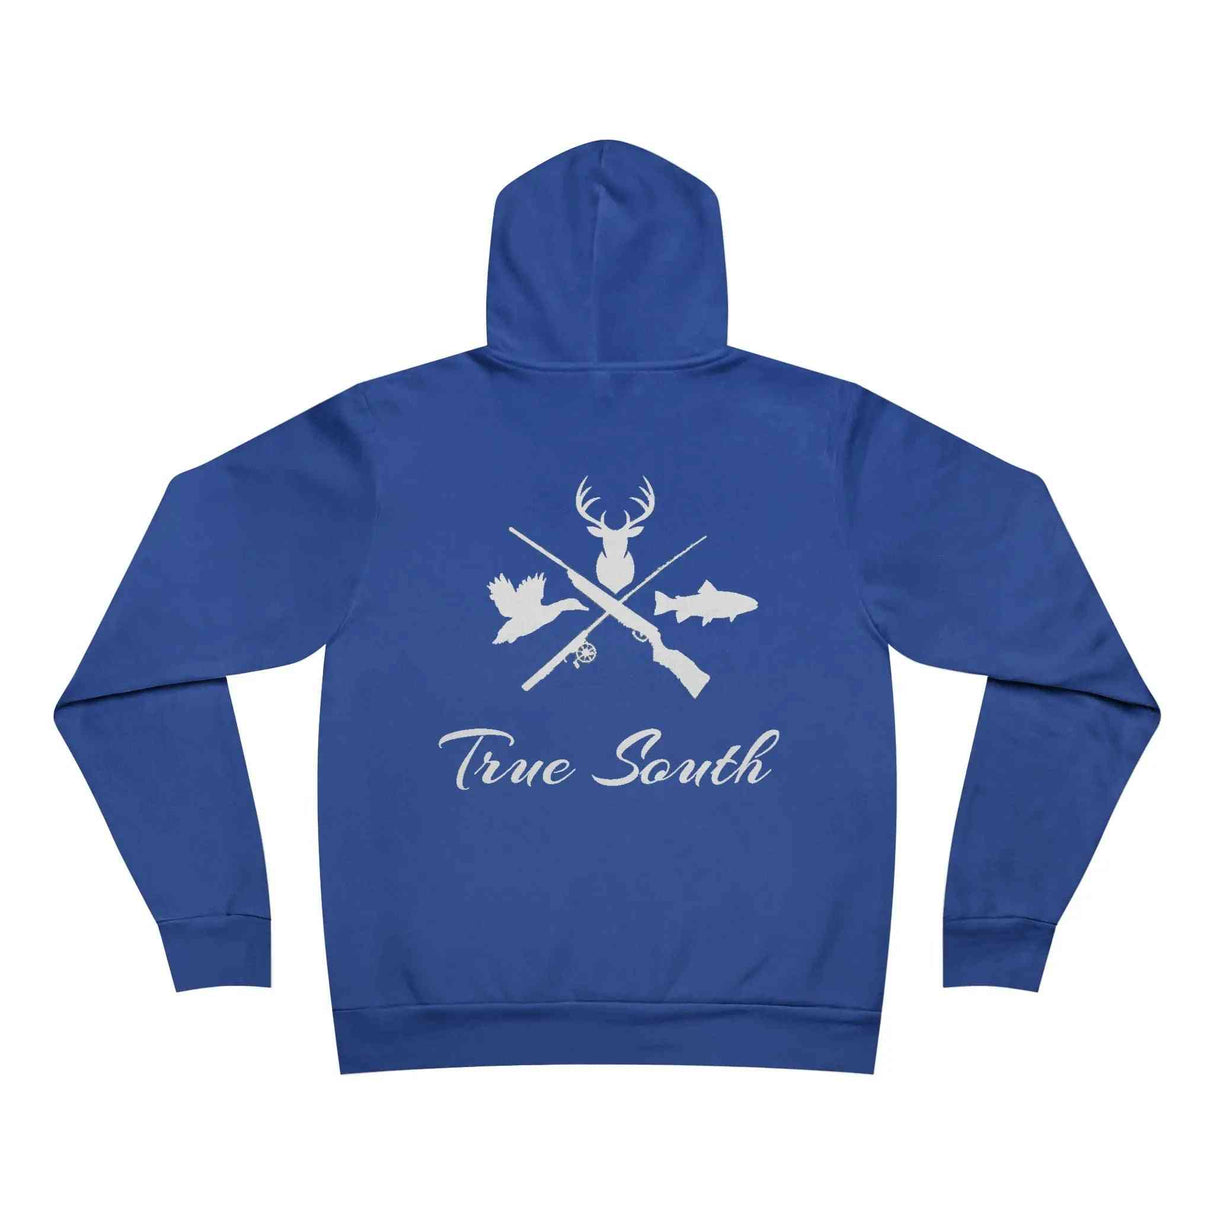 Southern Life Hoodie - True South